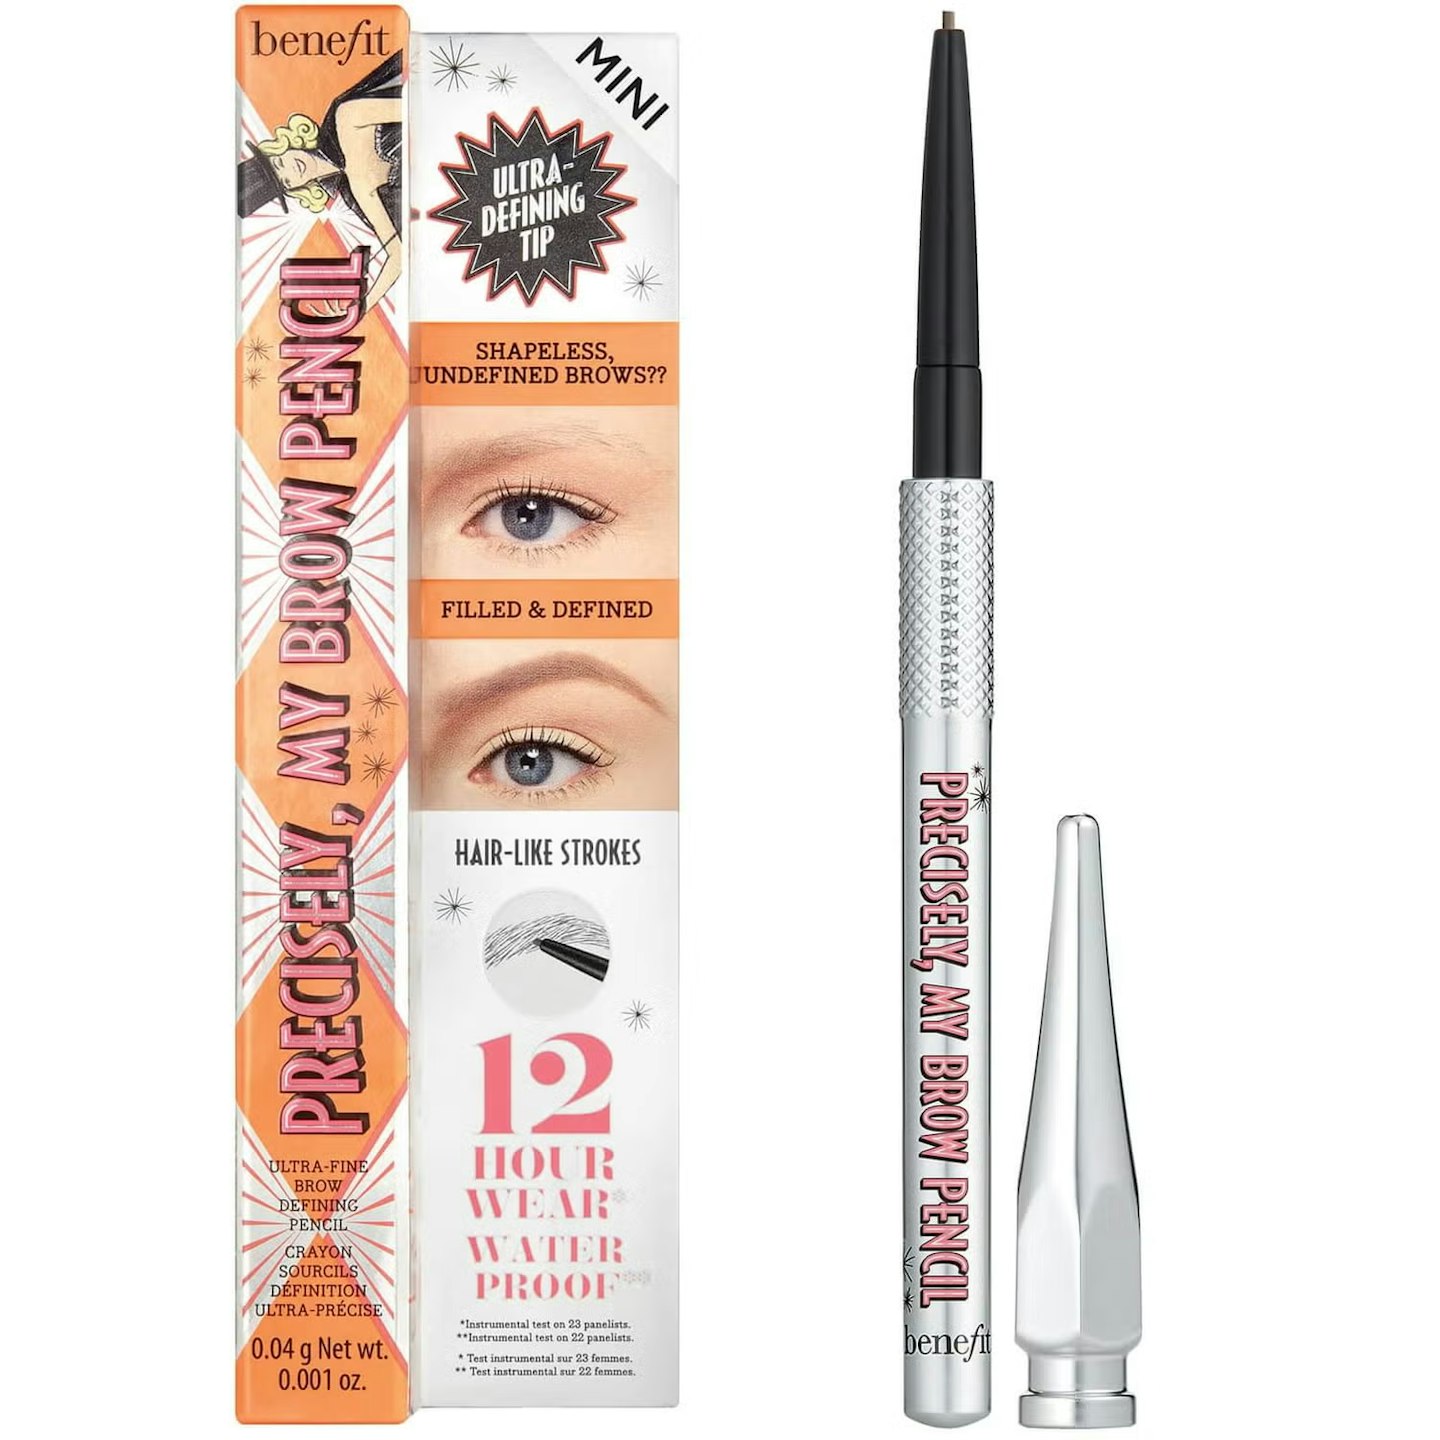 Benefit Precisely, My Brow Ultra-Fine Brow Defining Pencil (Mini)